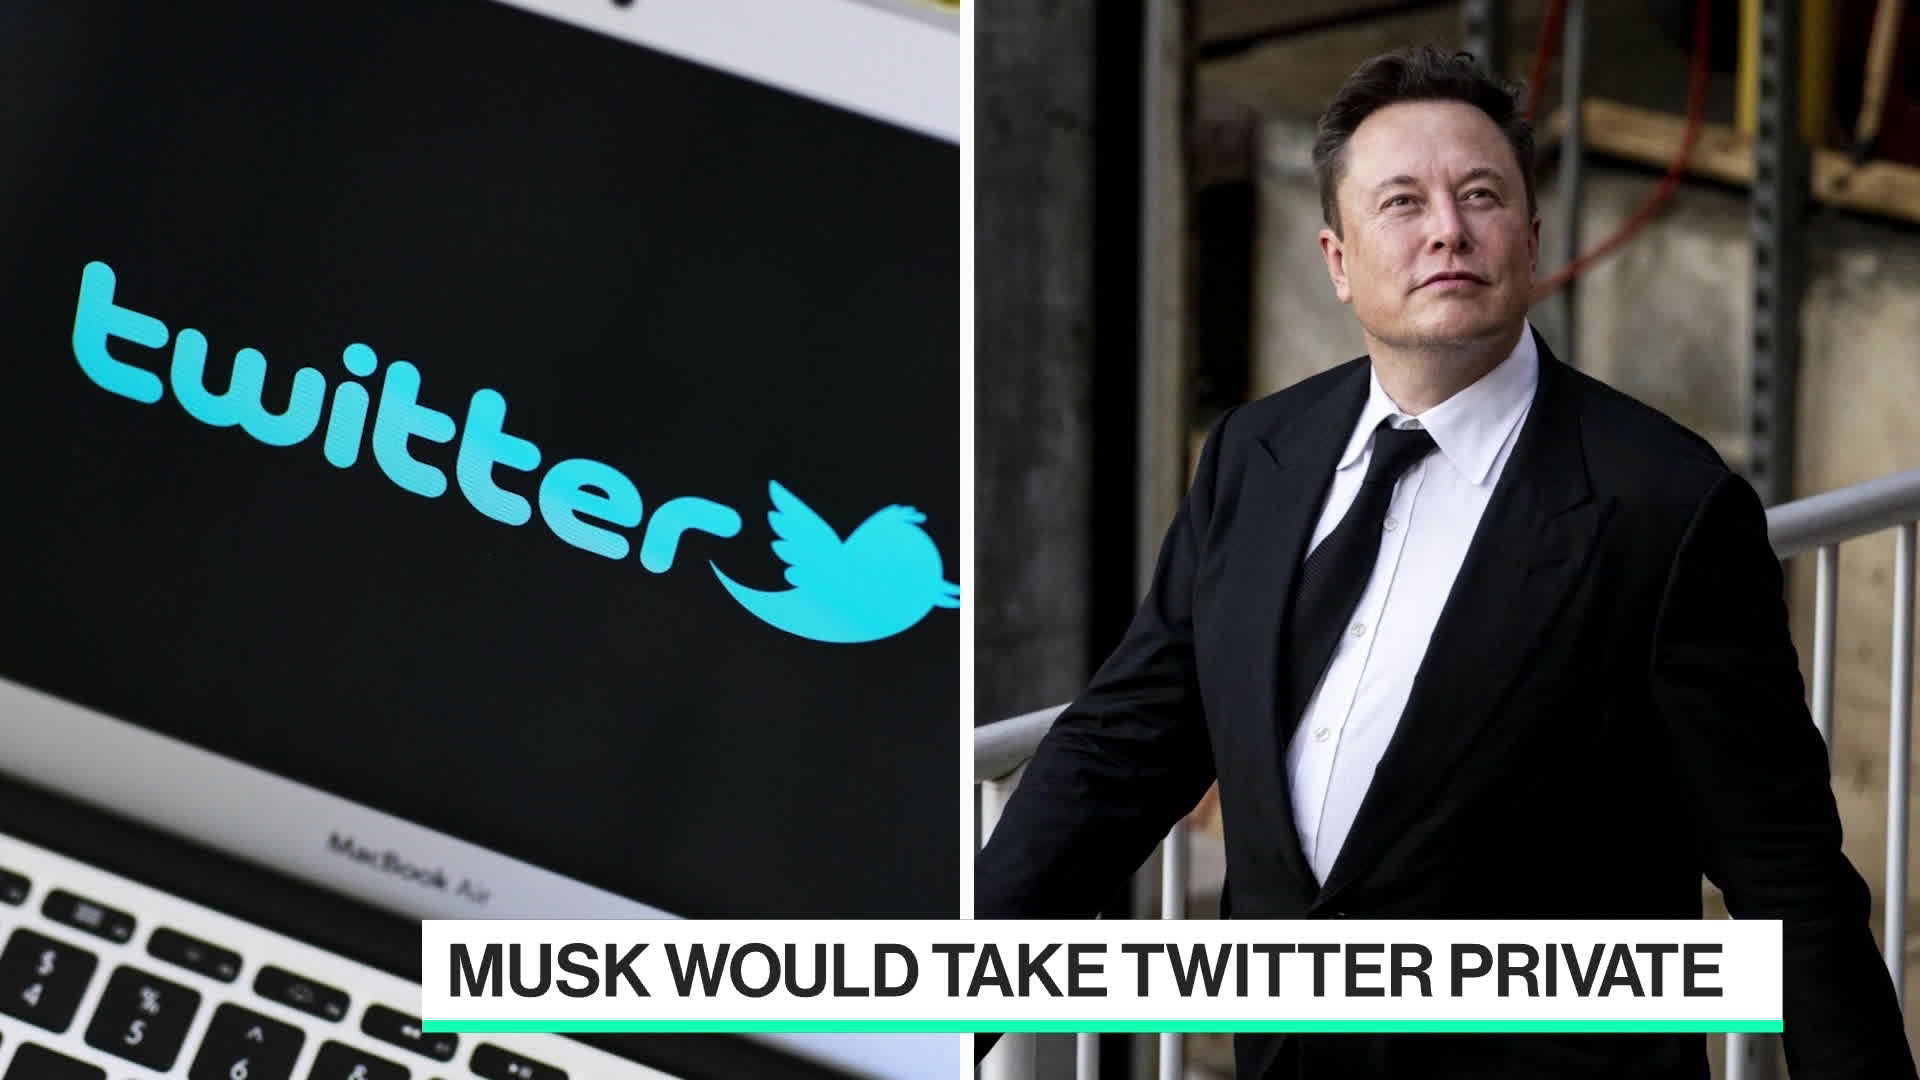 Elon Musk Wants to Take Twitter Private?